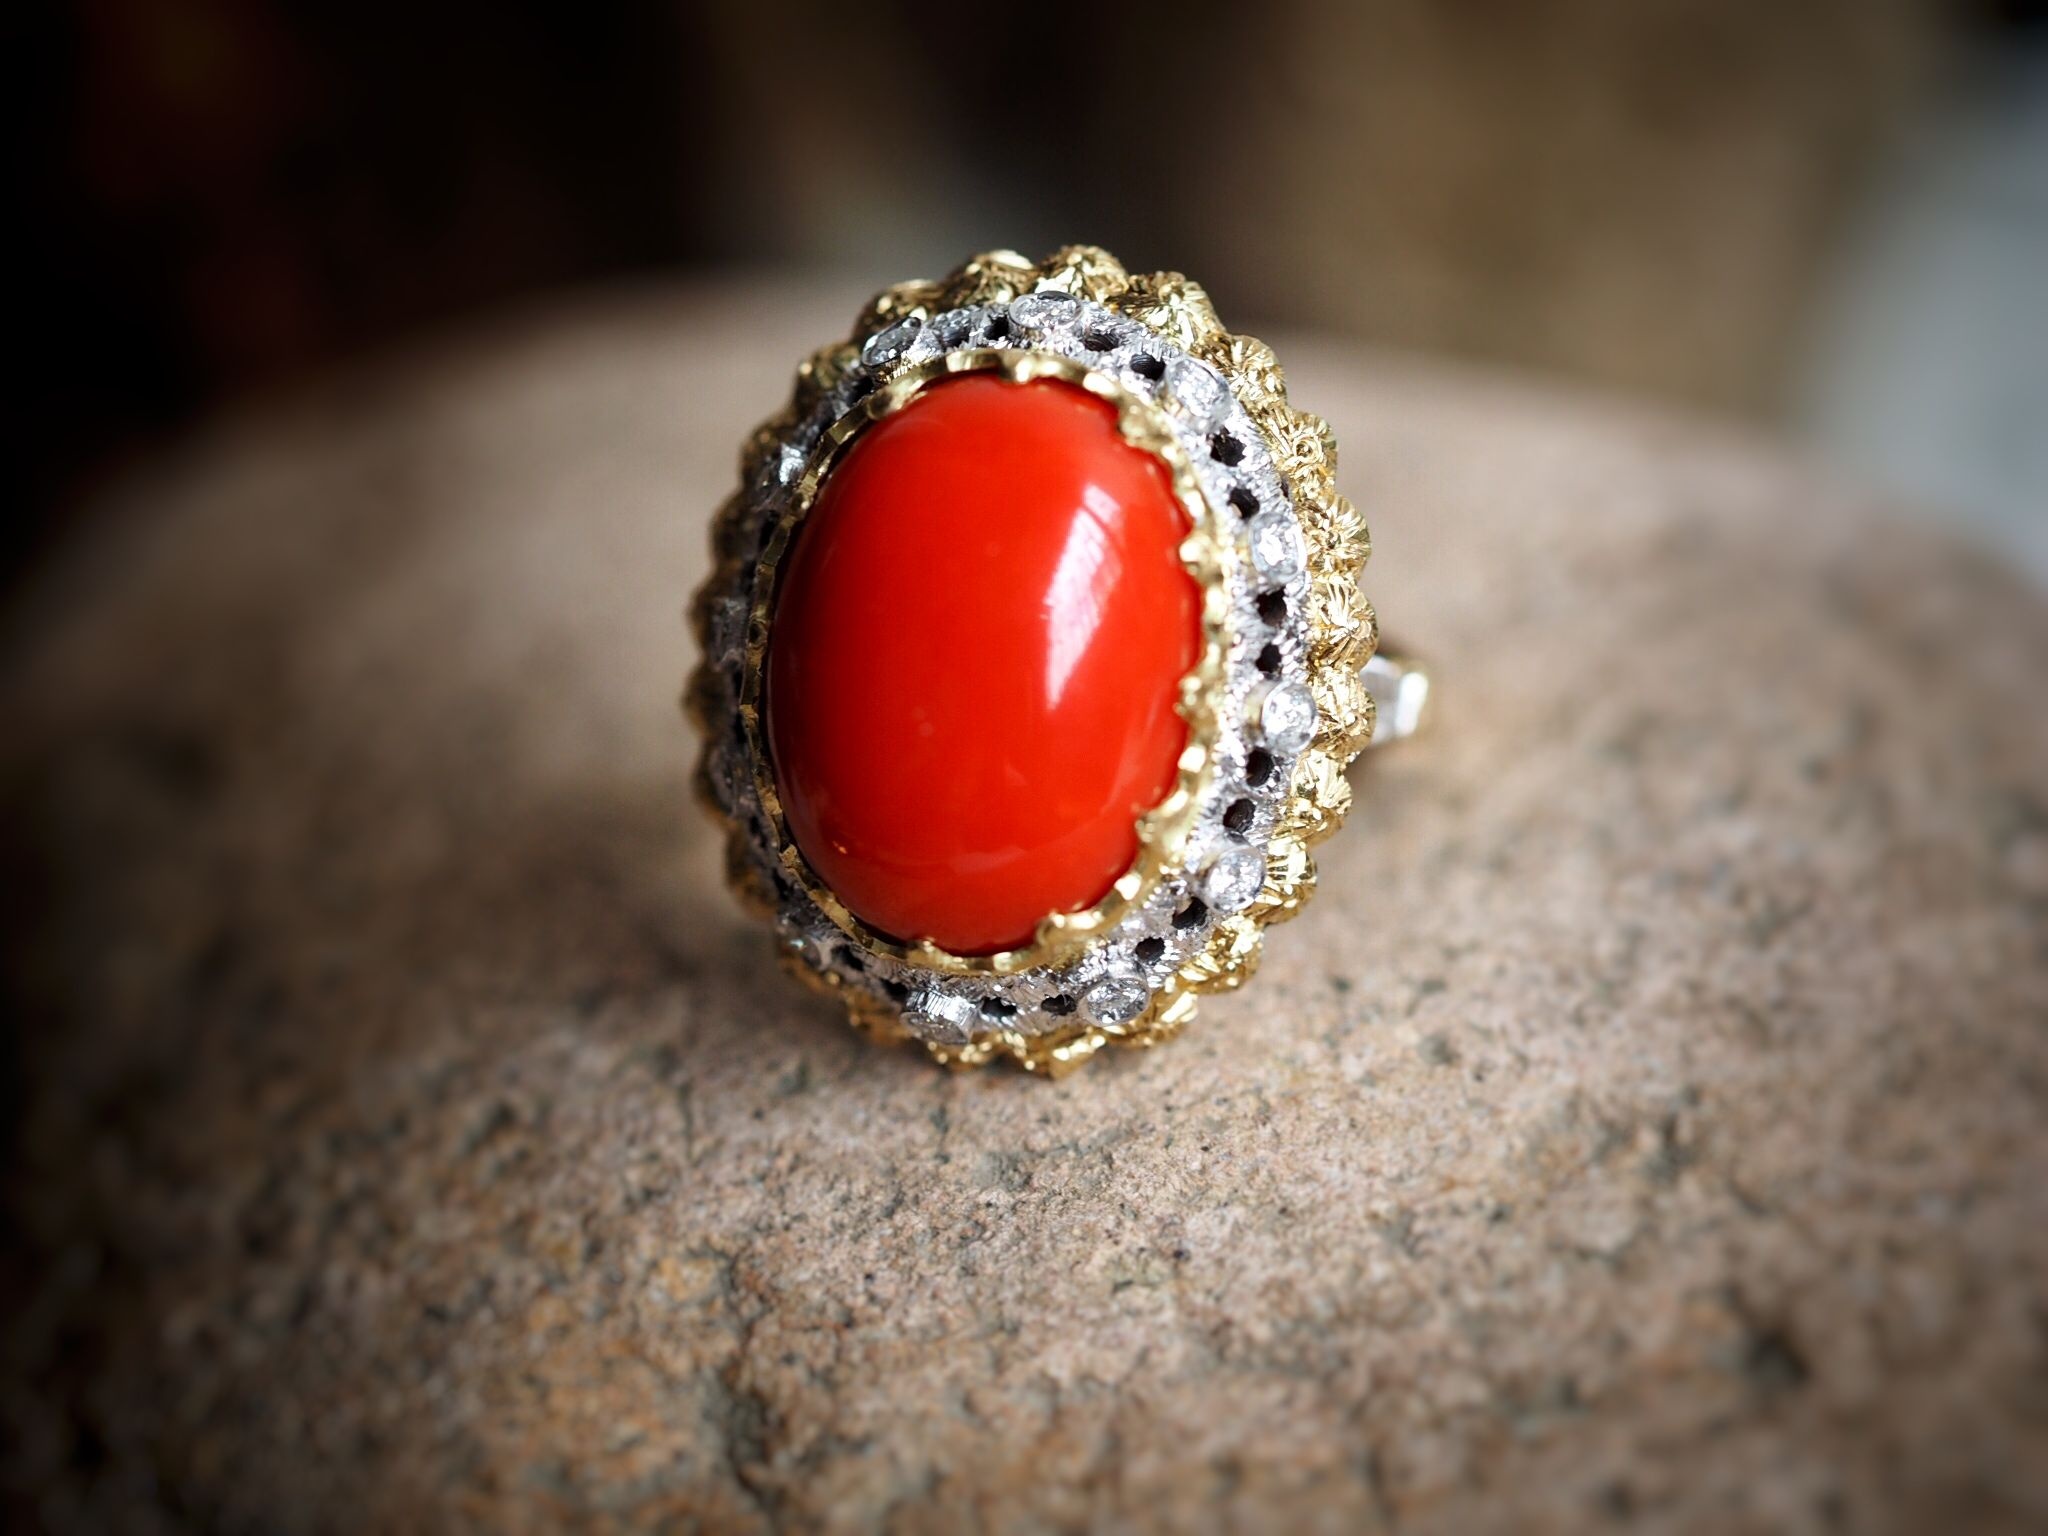 Red Coral, Dark red beauty, Two-toned gold, Sicily Italy, 2050x1540 HD Desktop